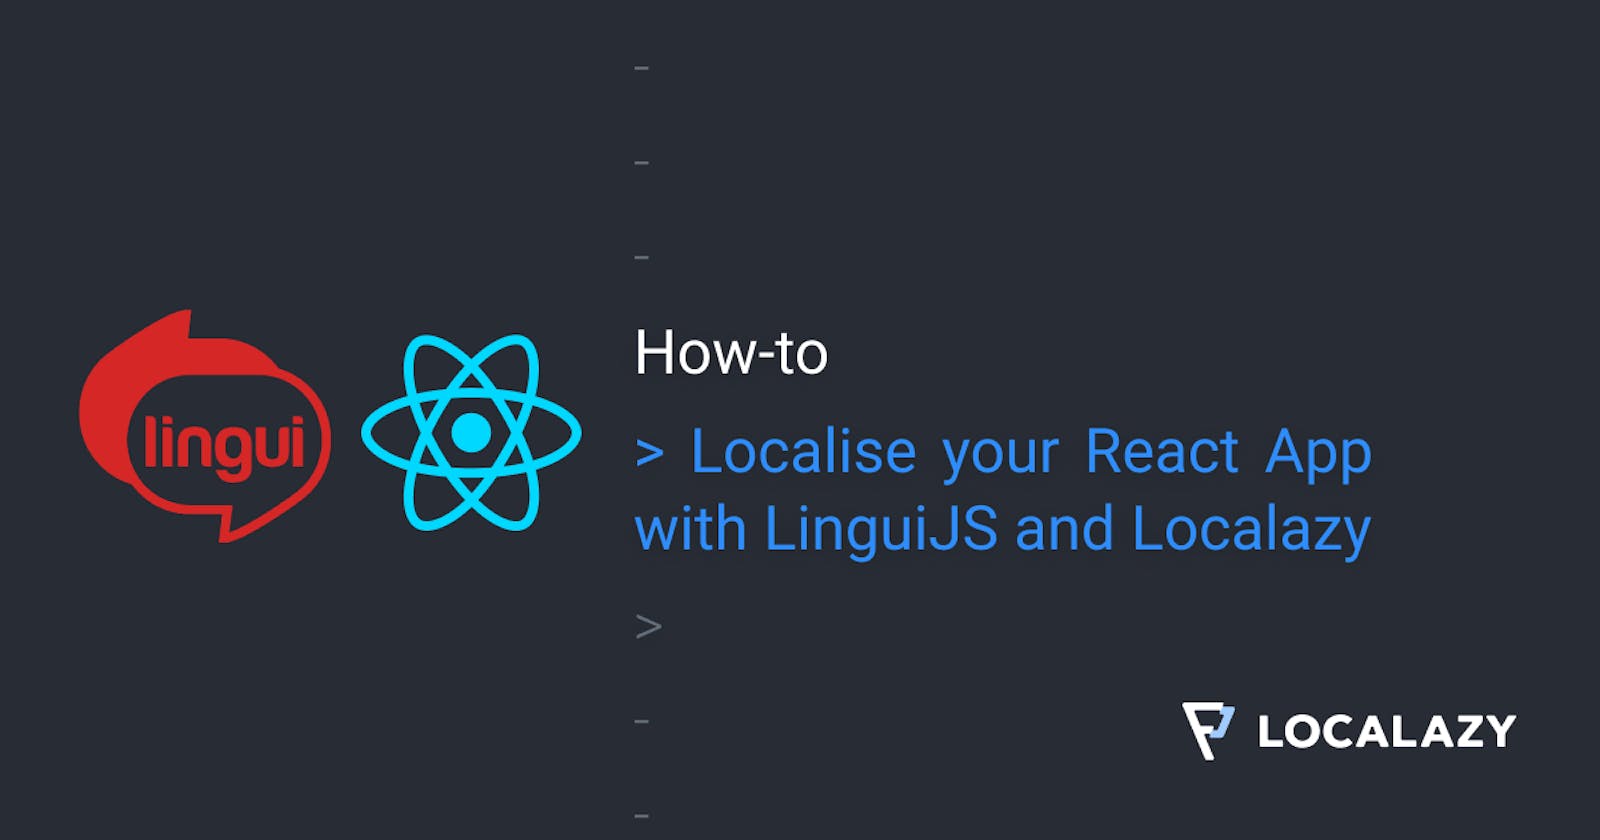 How to: Localise your React App with LinguiJS and Localazy